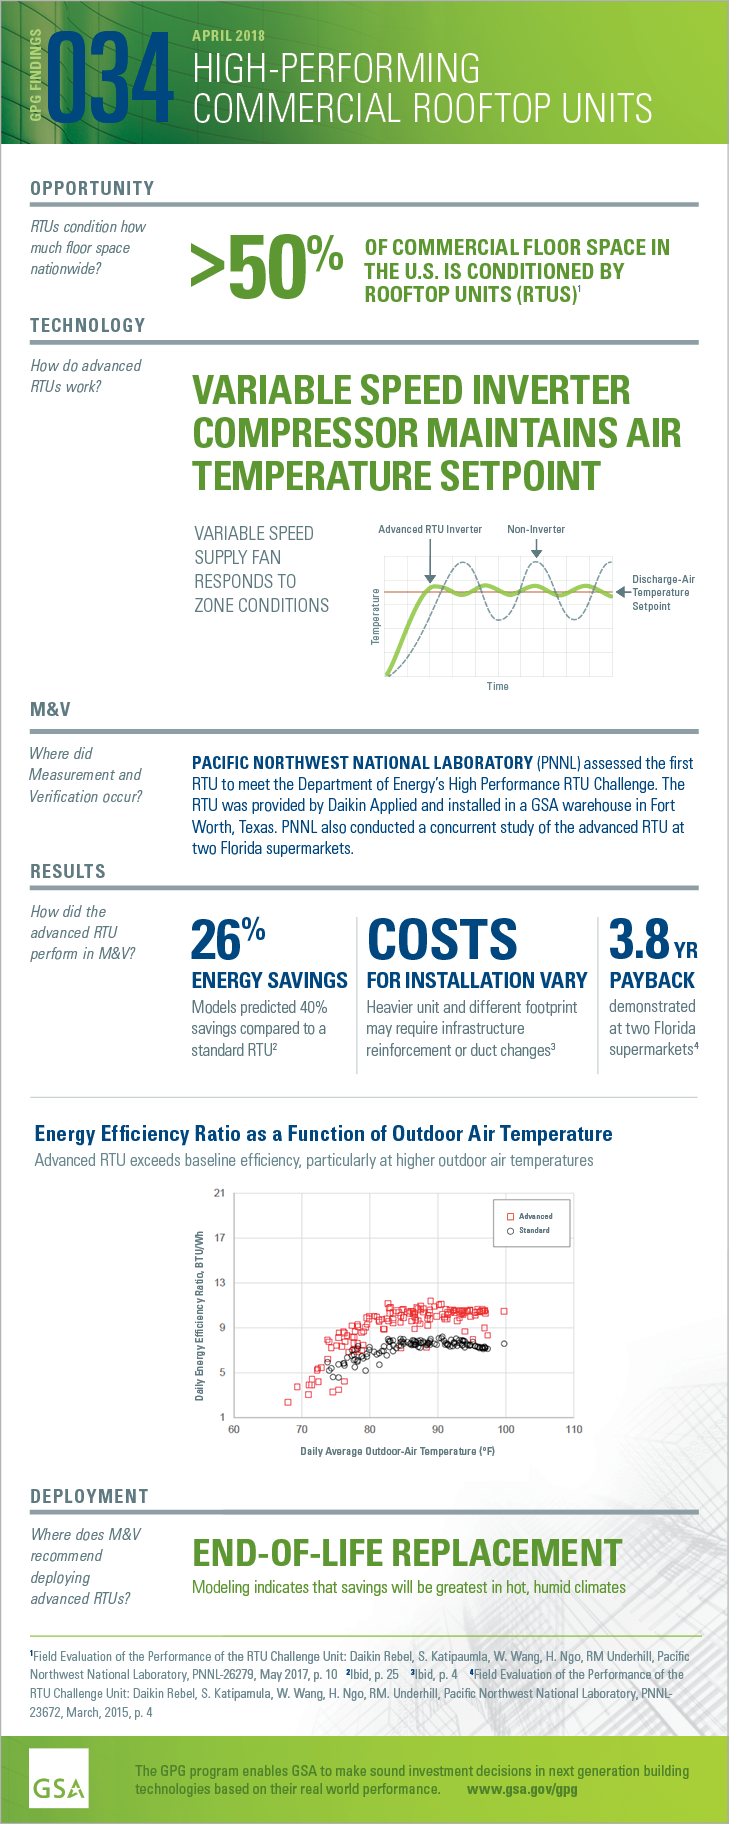 Download the PDF of the full-size infographic for GPG034 High-Performing RTUs.